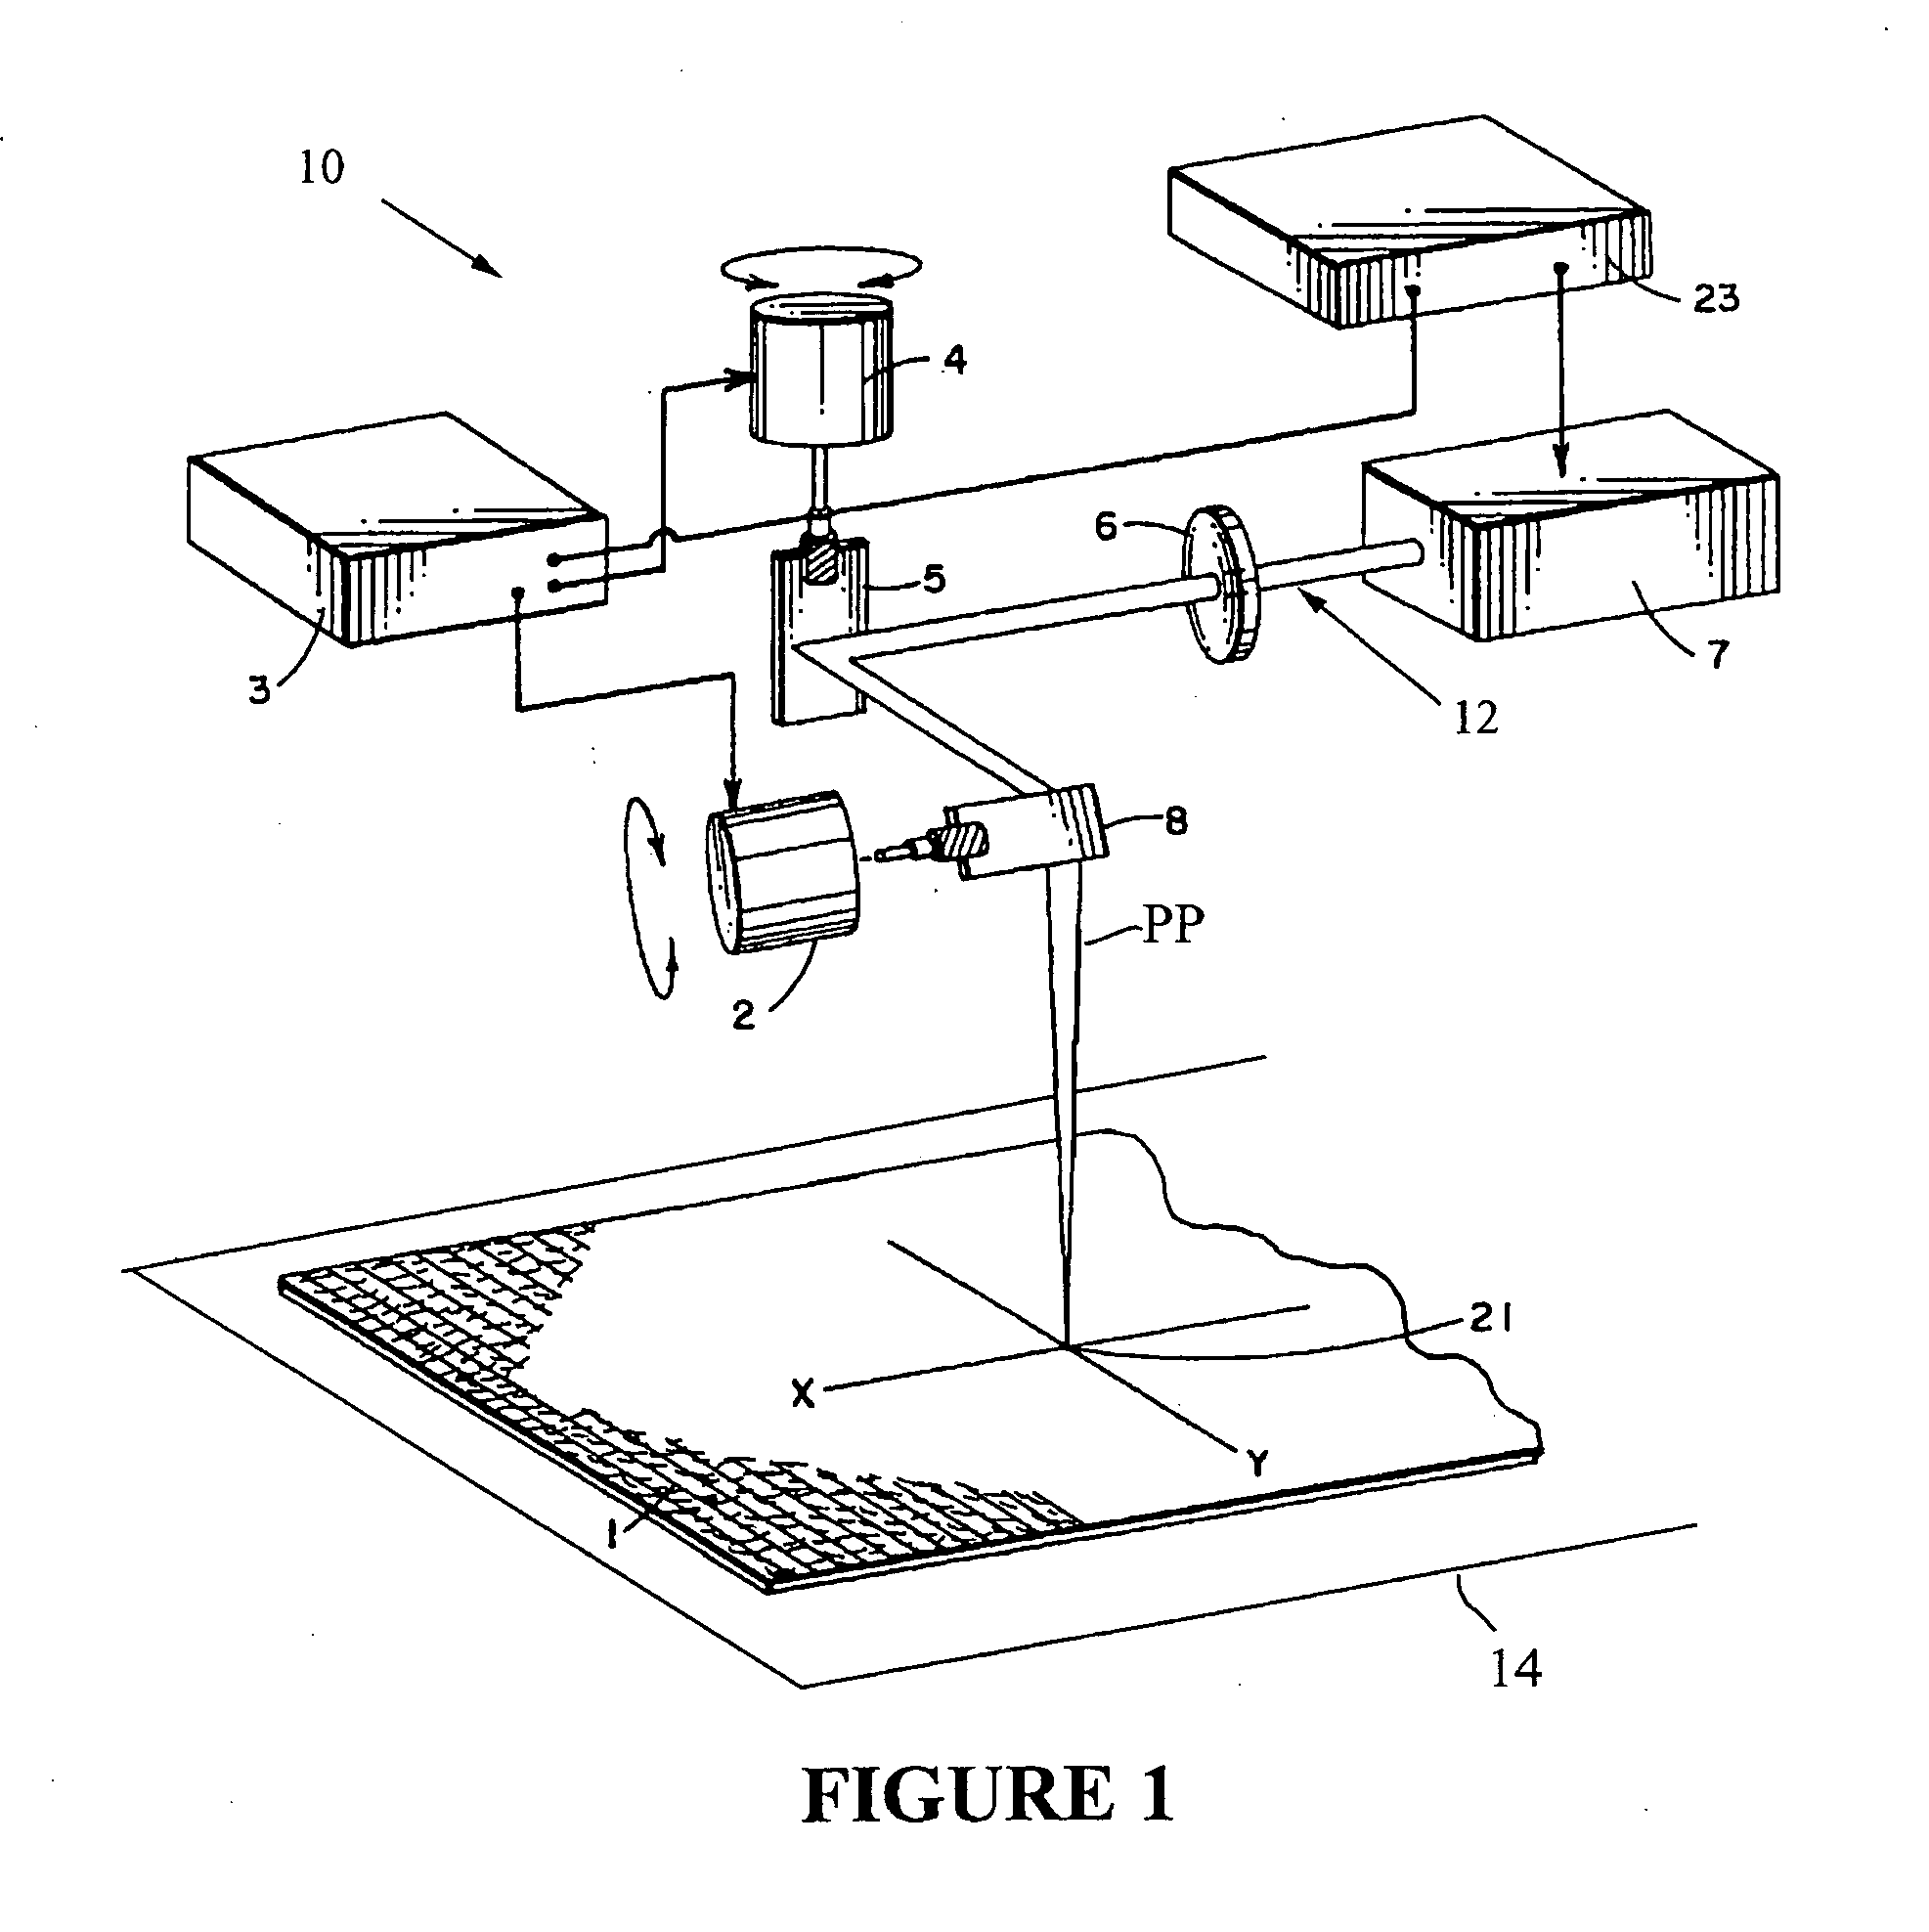 Selectively altering a fiber height in a pile fabric and apparatus